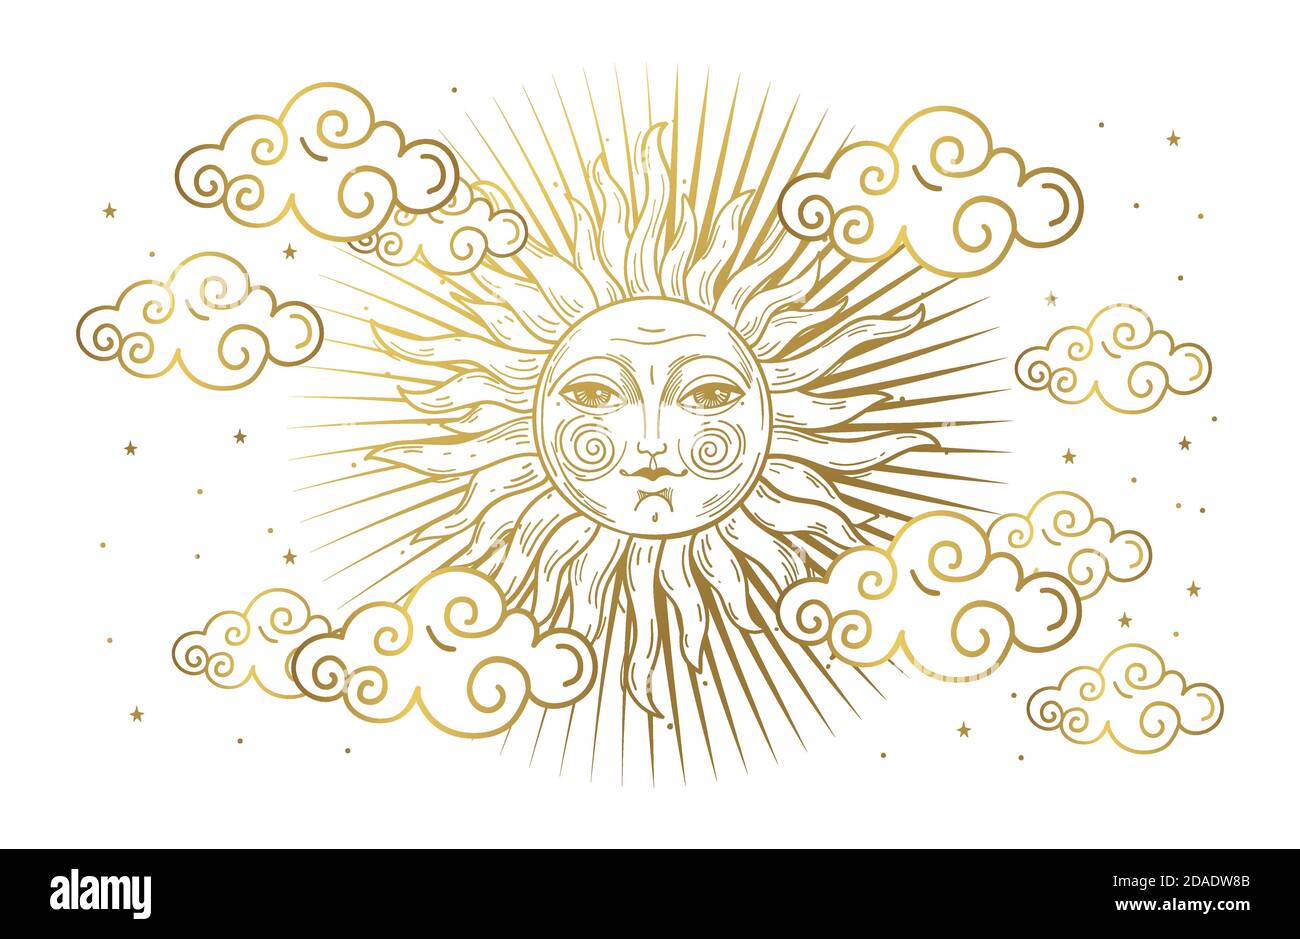 Magic banner for astrology, tarot, boho design. Universe, golden sun with face and clouds on white isolated background. Esoteric vector illustration, pattern Stock Vector